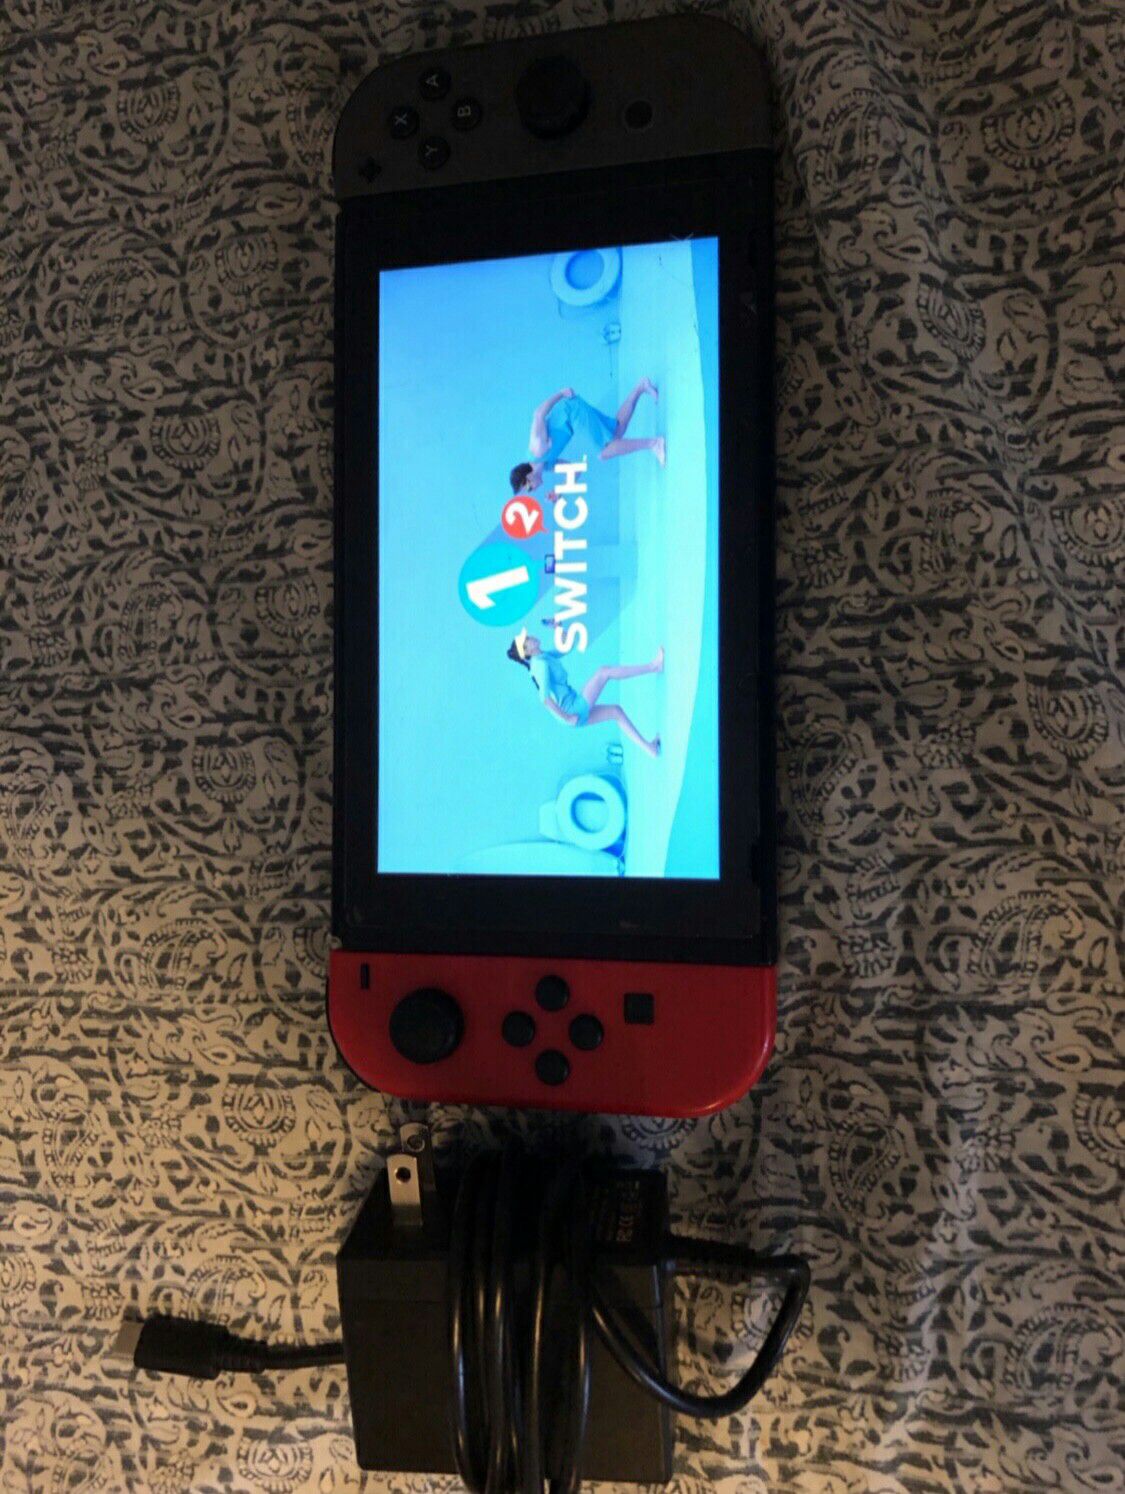 Nintendo Switch plus 3 Games! Great condition